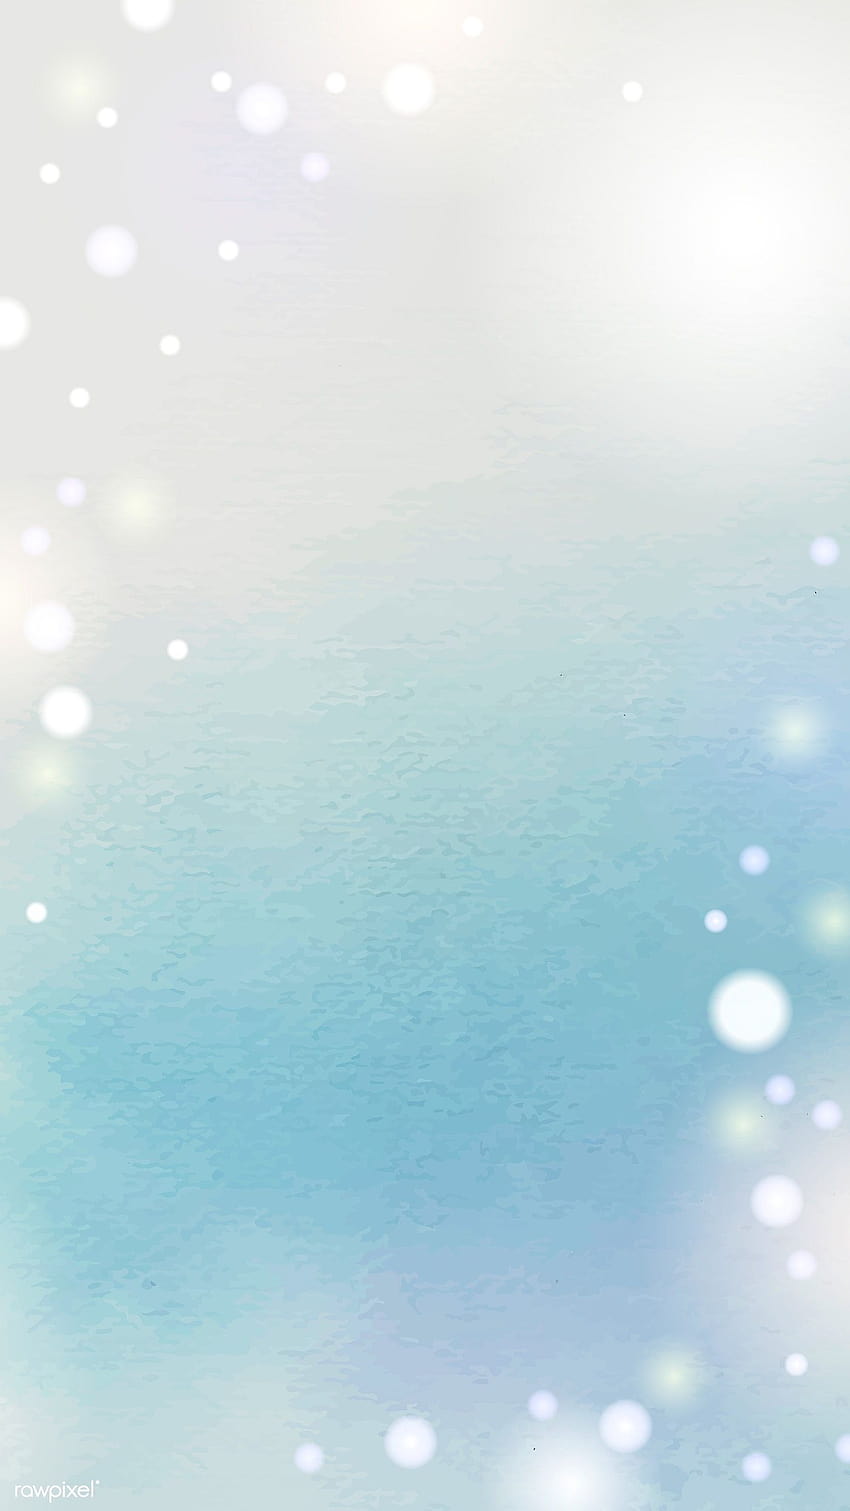 Dreamy winter watercolor mobile backgrounds, gradient phone HD phone wallpaper